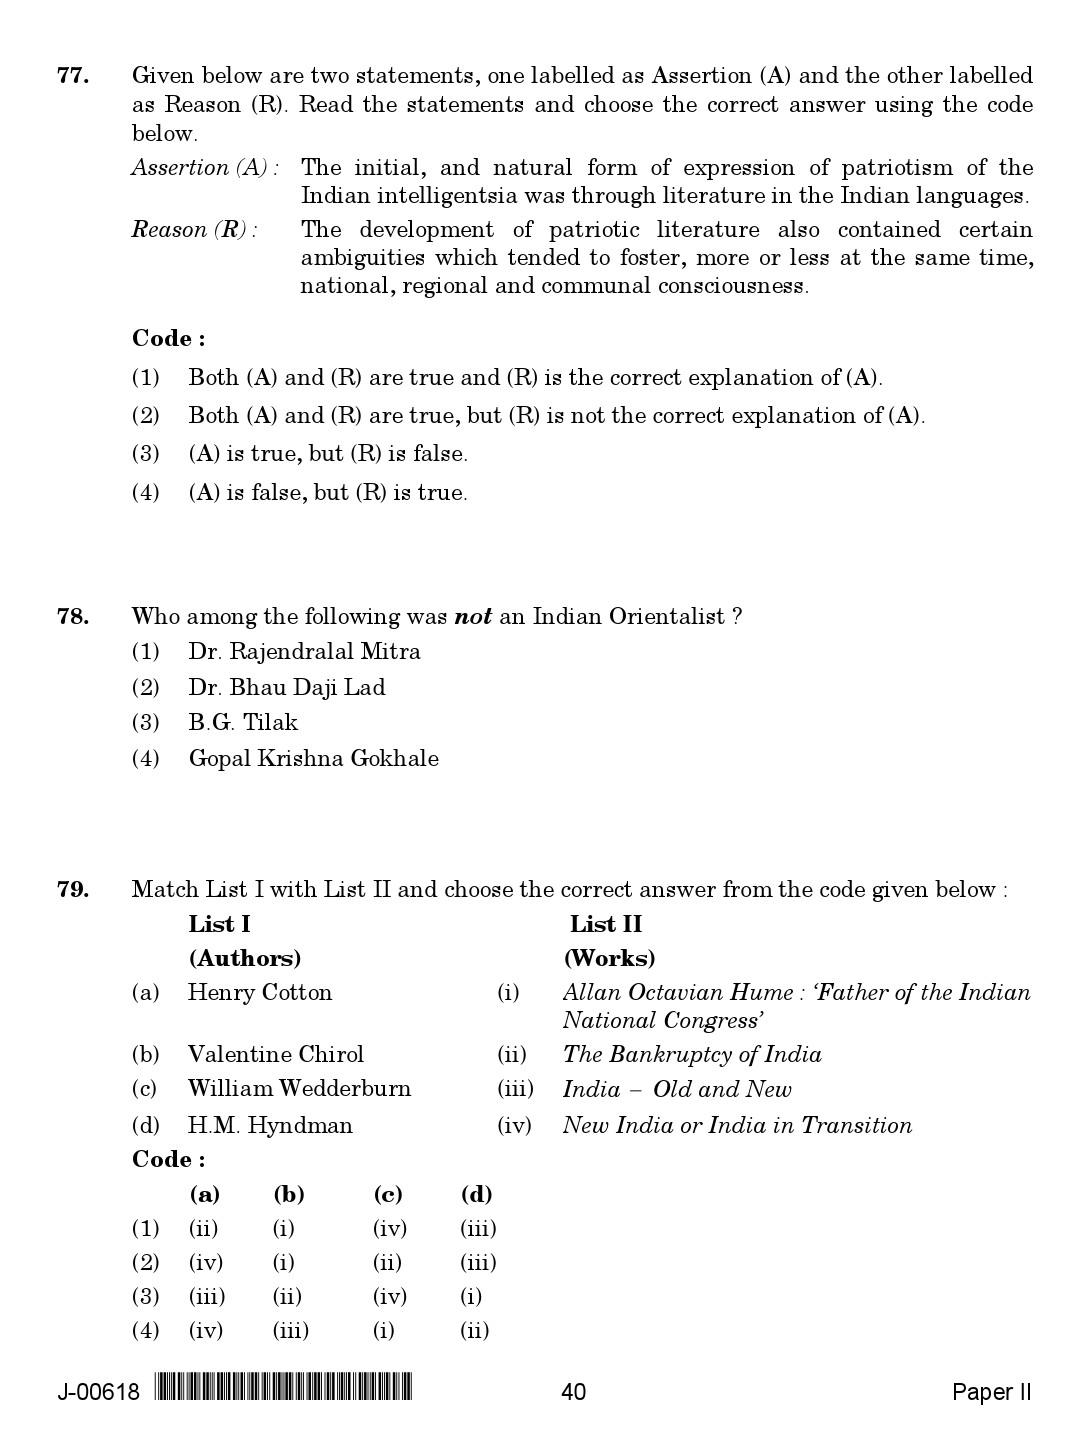 History Question Paper II July 2018 in English 2nd Exam 21